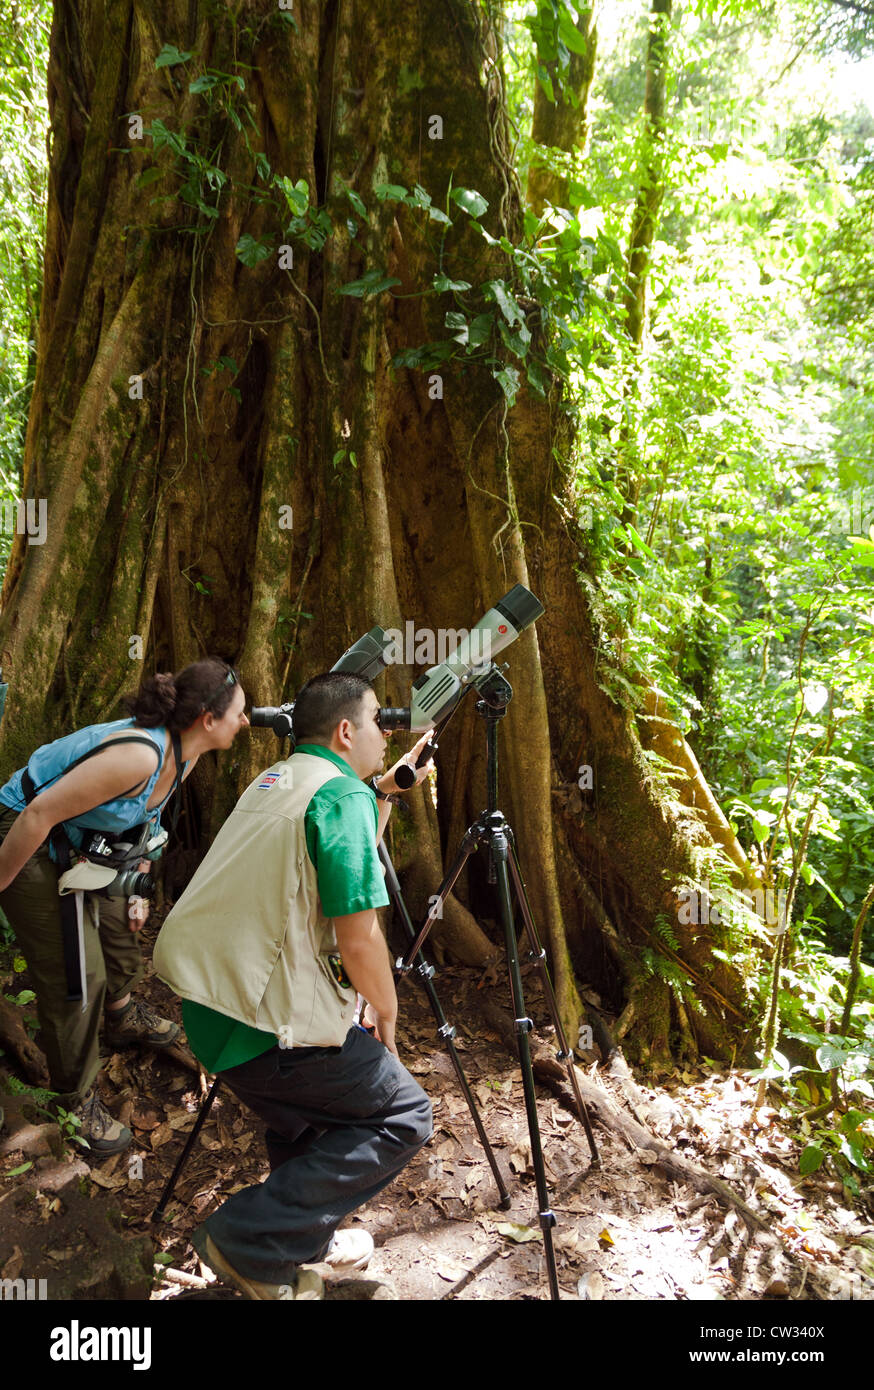 Monteverde Cloud Forest Preserve, Costa Rica: Tourist and guide using spotting scopes.   Editorial Use Only. Stock Photo